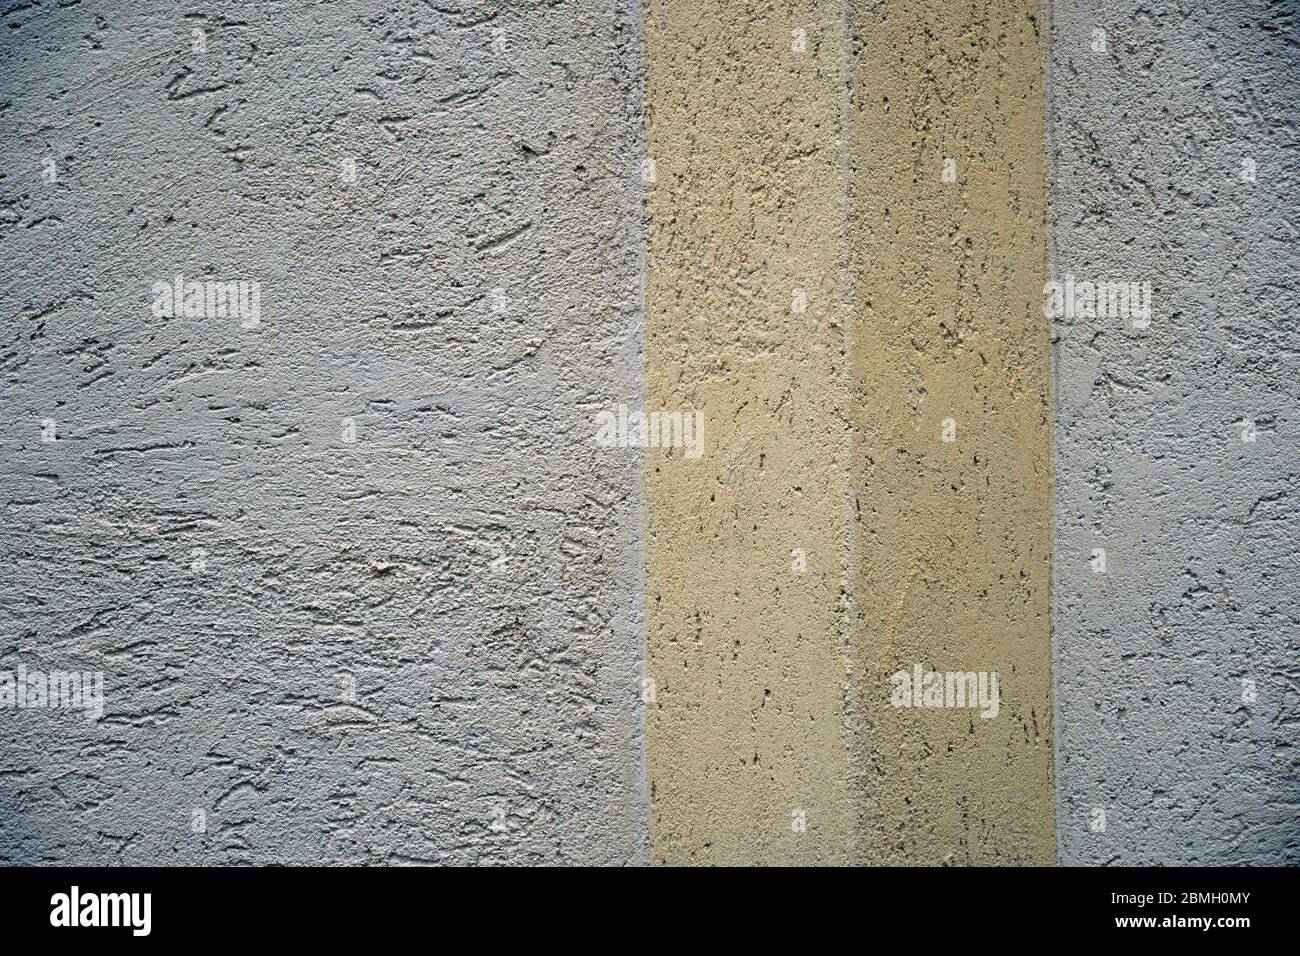 Concrete wall, lines and shapes architectural concept colour photography. Stock Photo